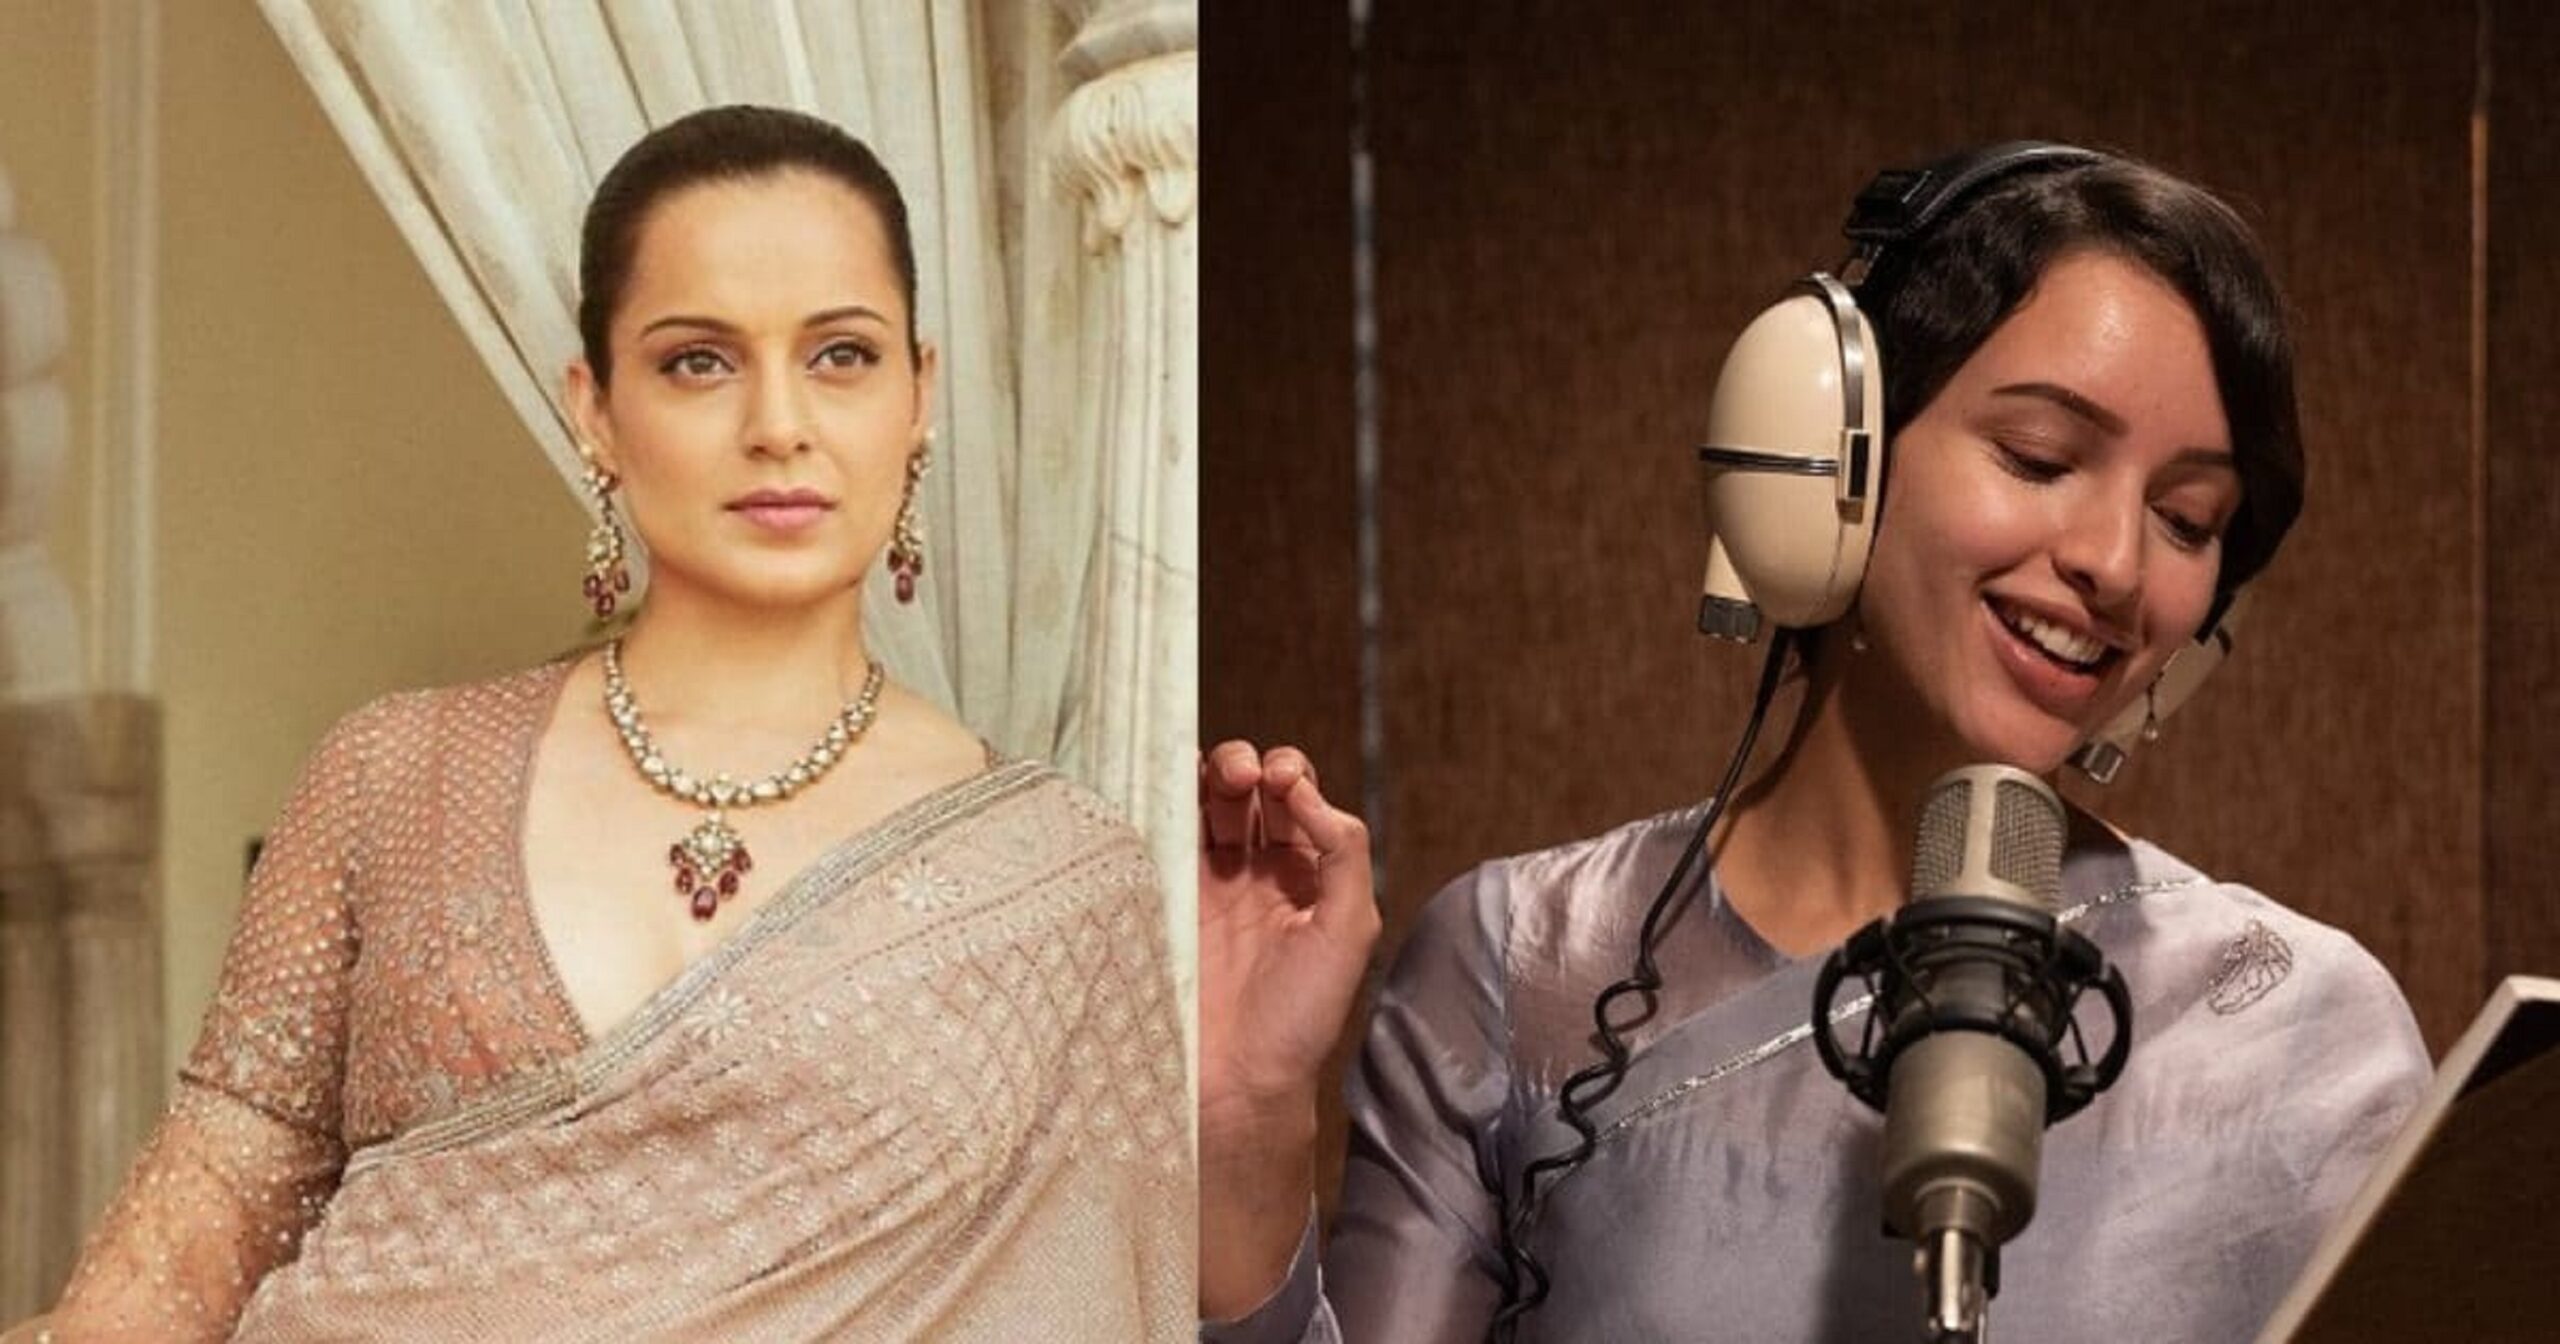 Tripti Dimri feels motivated after Kangana Ranaut’s praise for her work, calls Kangana ‘One of the best actresses’